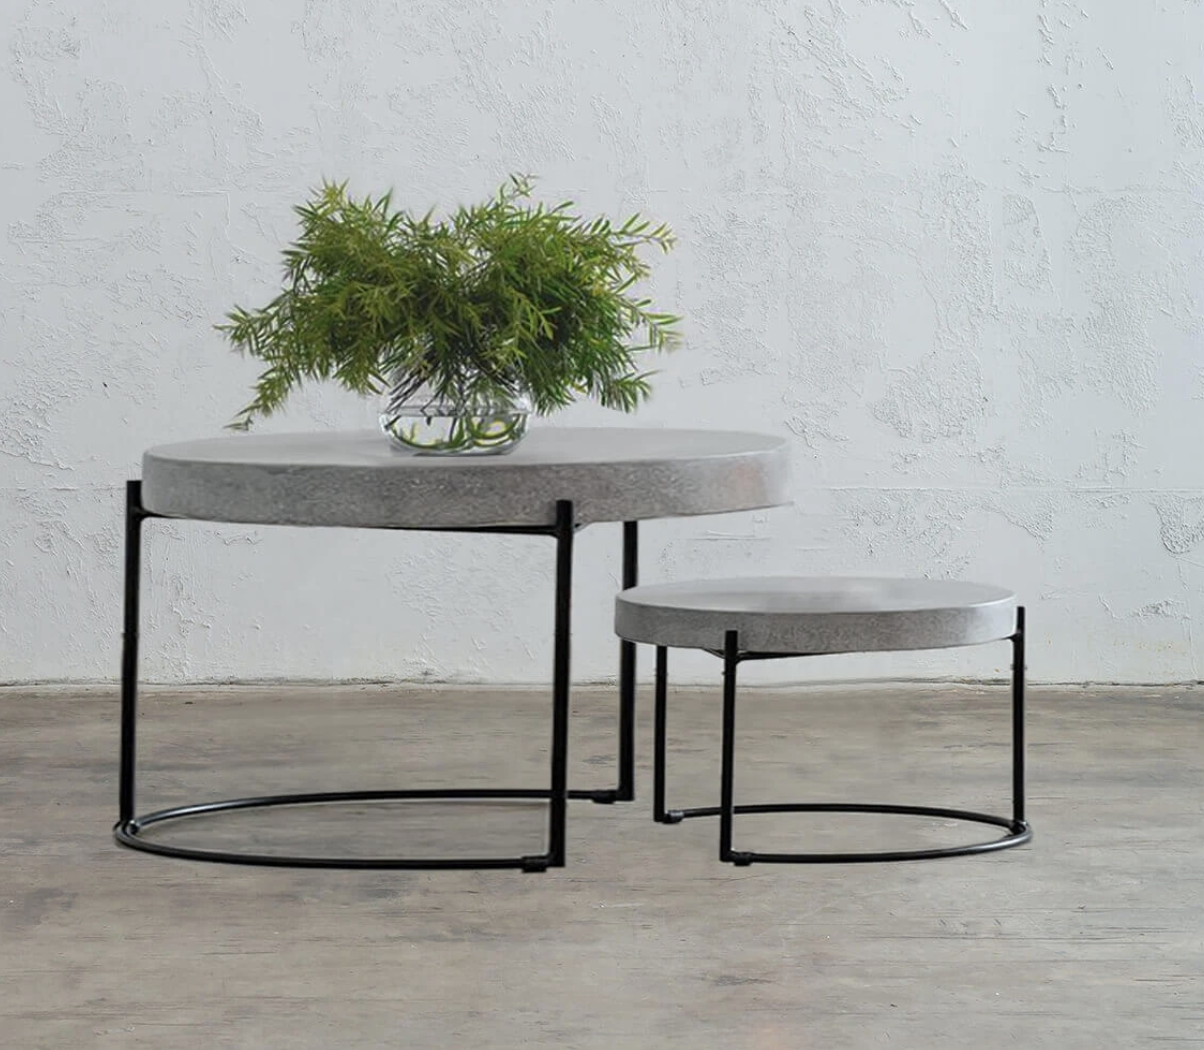 Aria Concrete Granite Coffee Table from The Modern